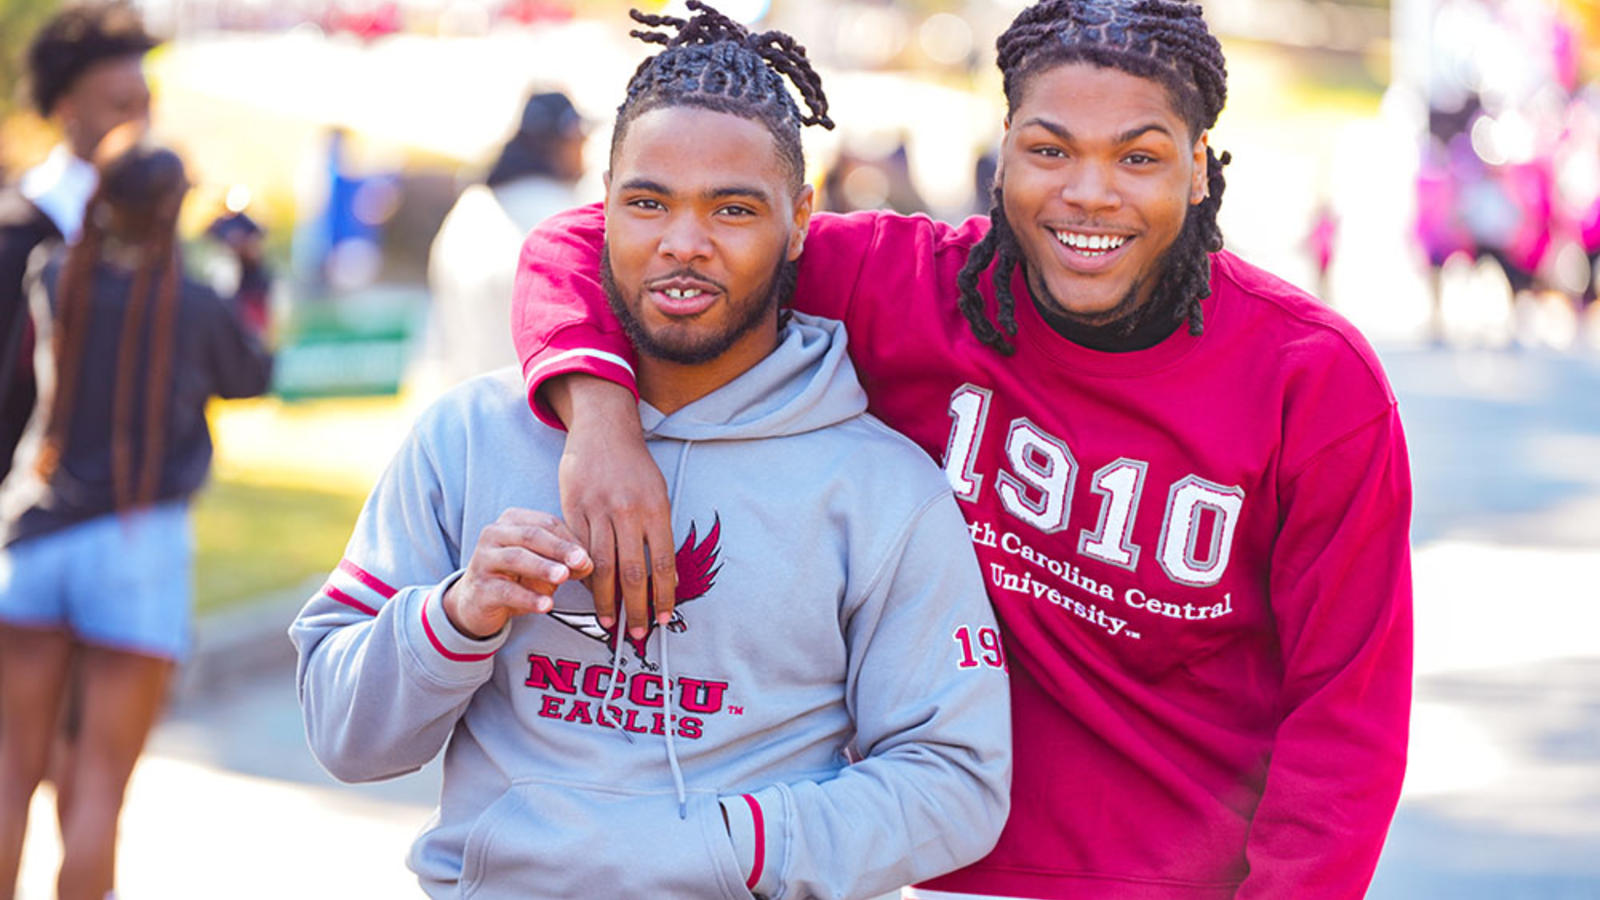 Lululemon x NCCU Homecoming Inspo, Gallery posted by BehaveBridgette